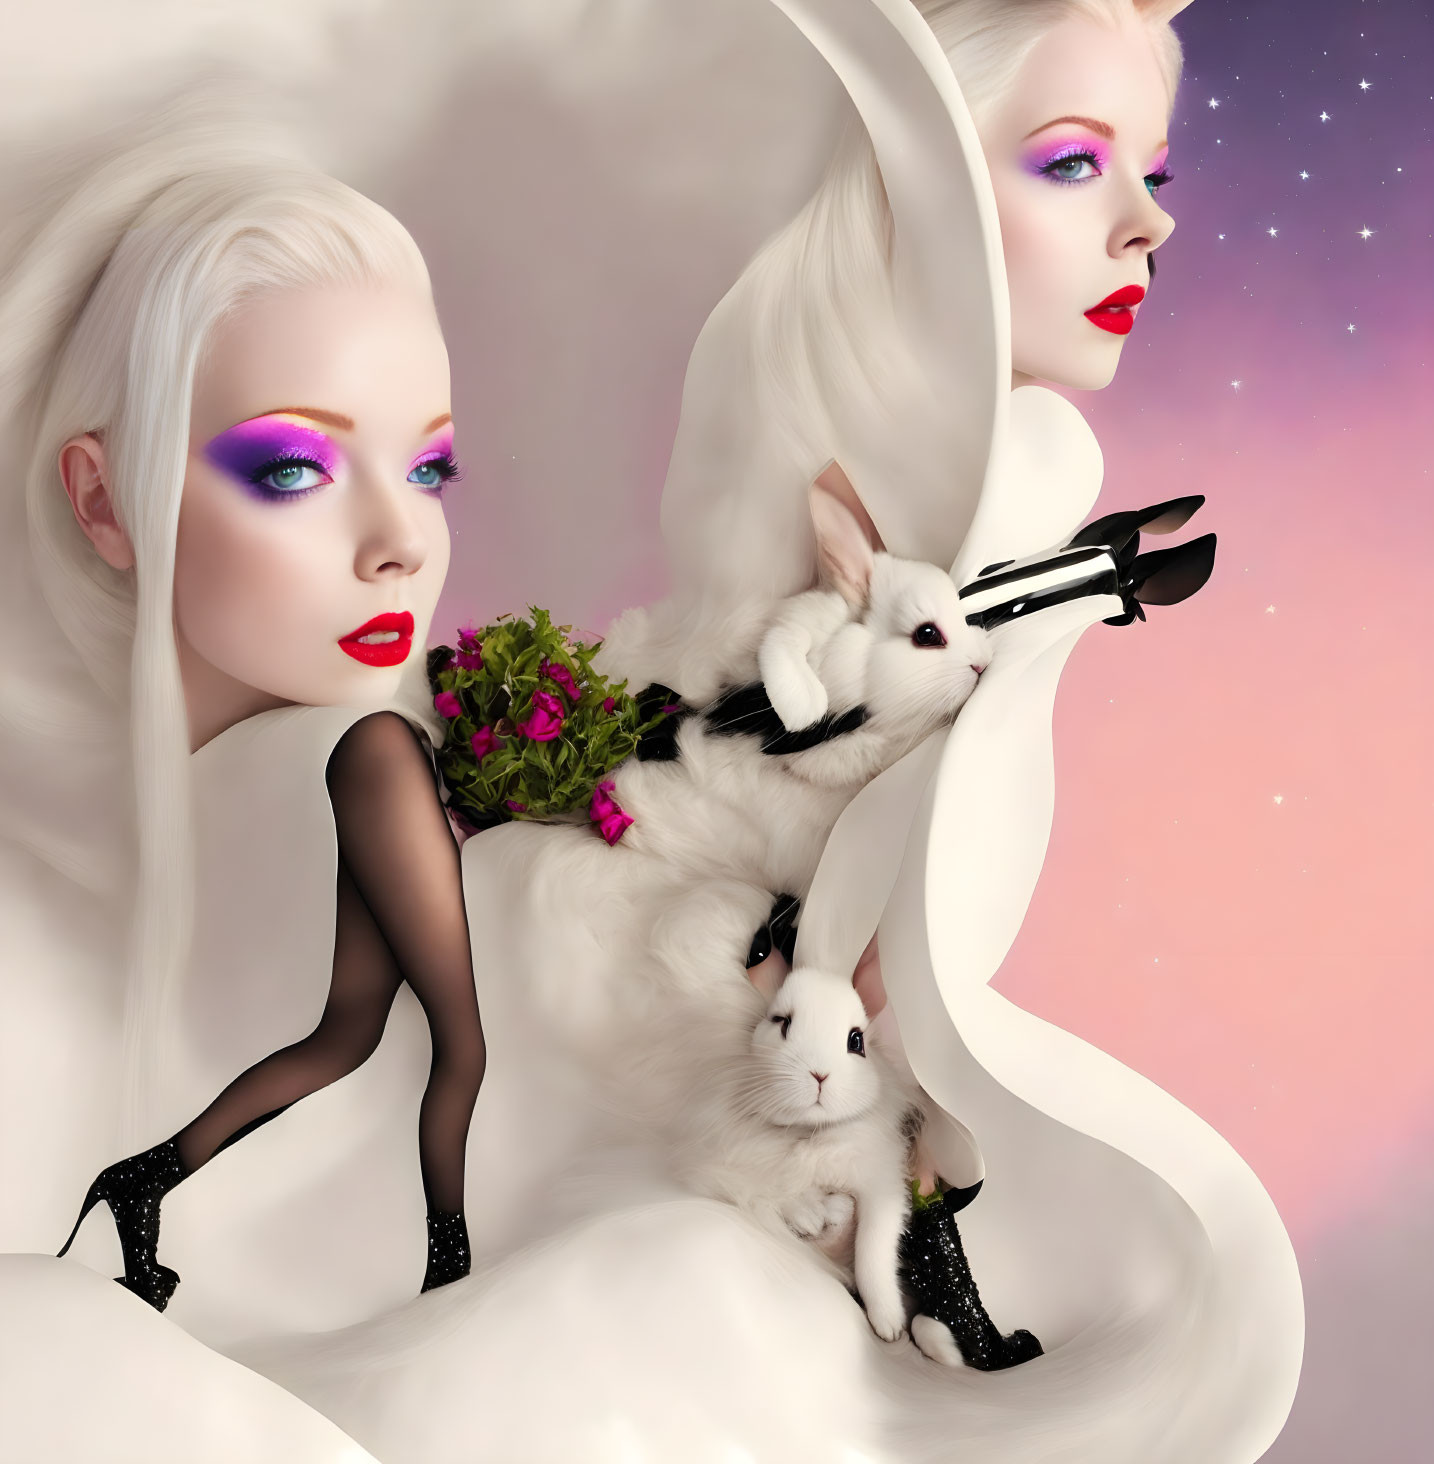 Surreal image: Twin women with white hair, rabbits, cosmic background, white fabric.